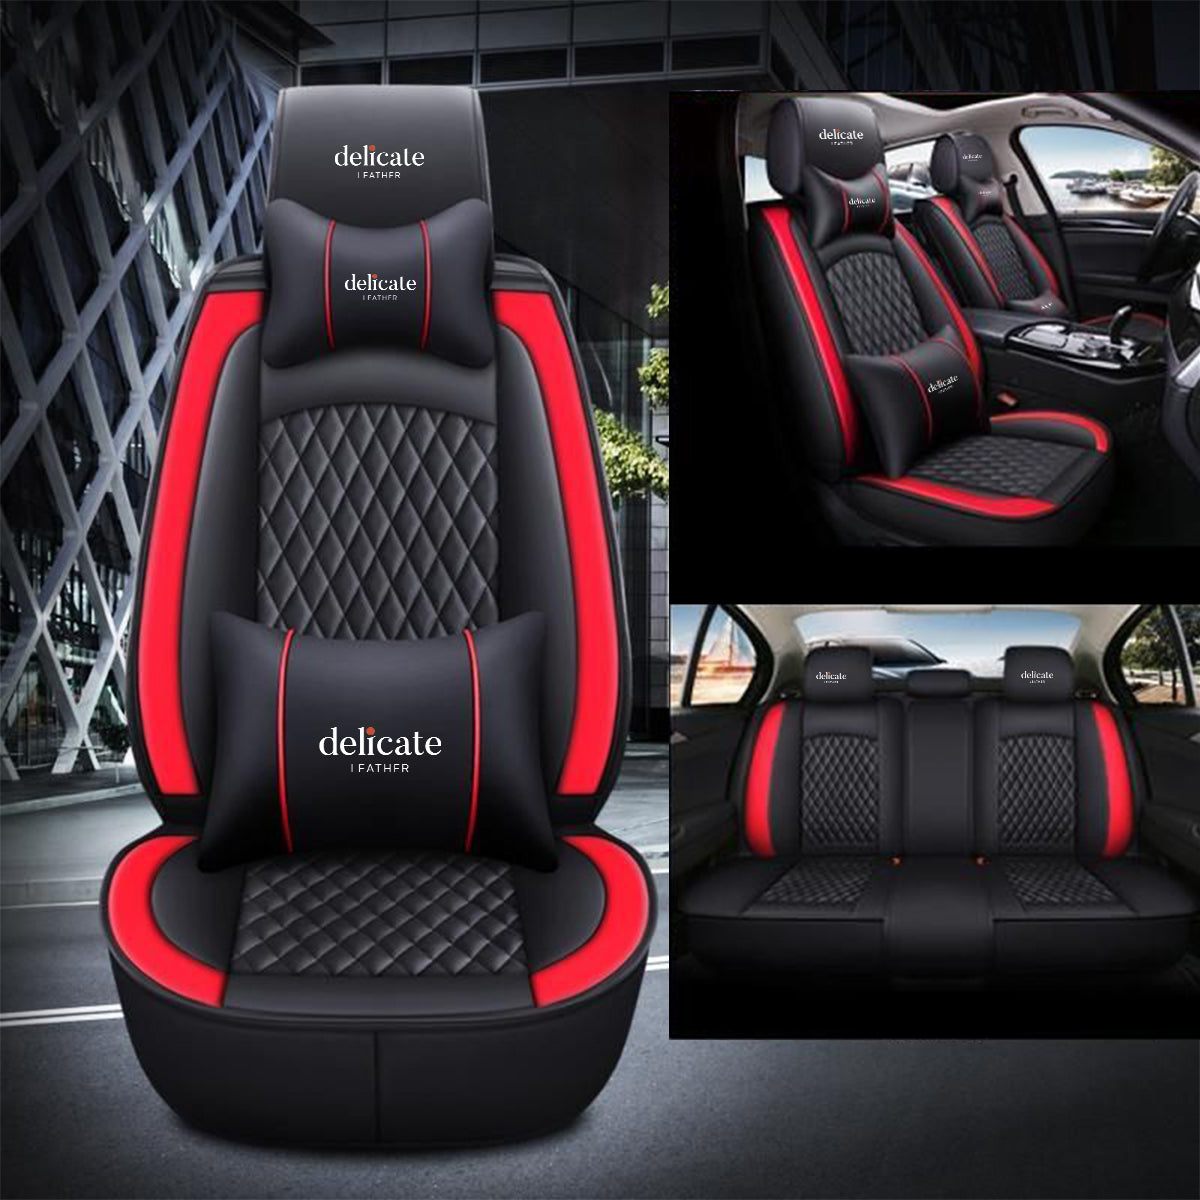 Delicate Leather - Custom Unique High-Quality Leather Car Accessories